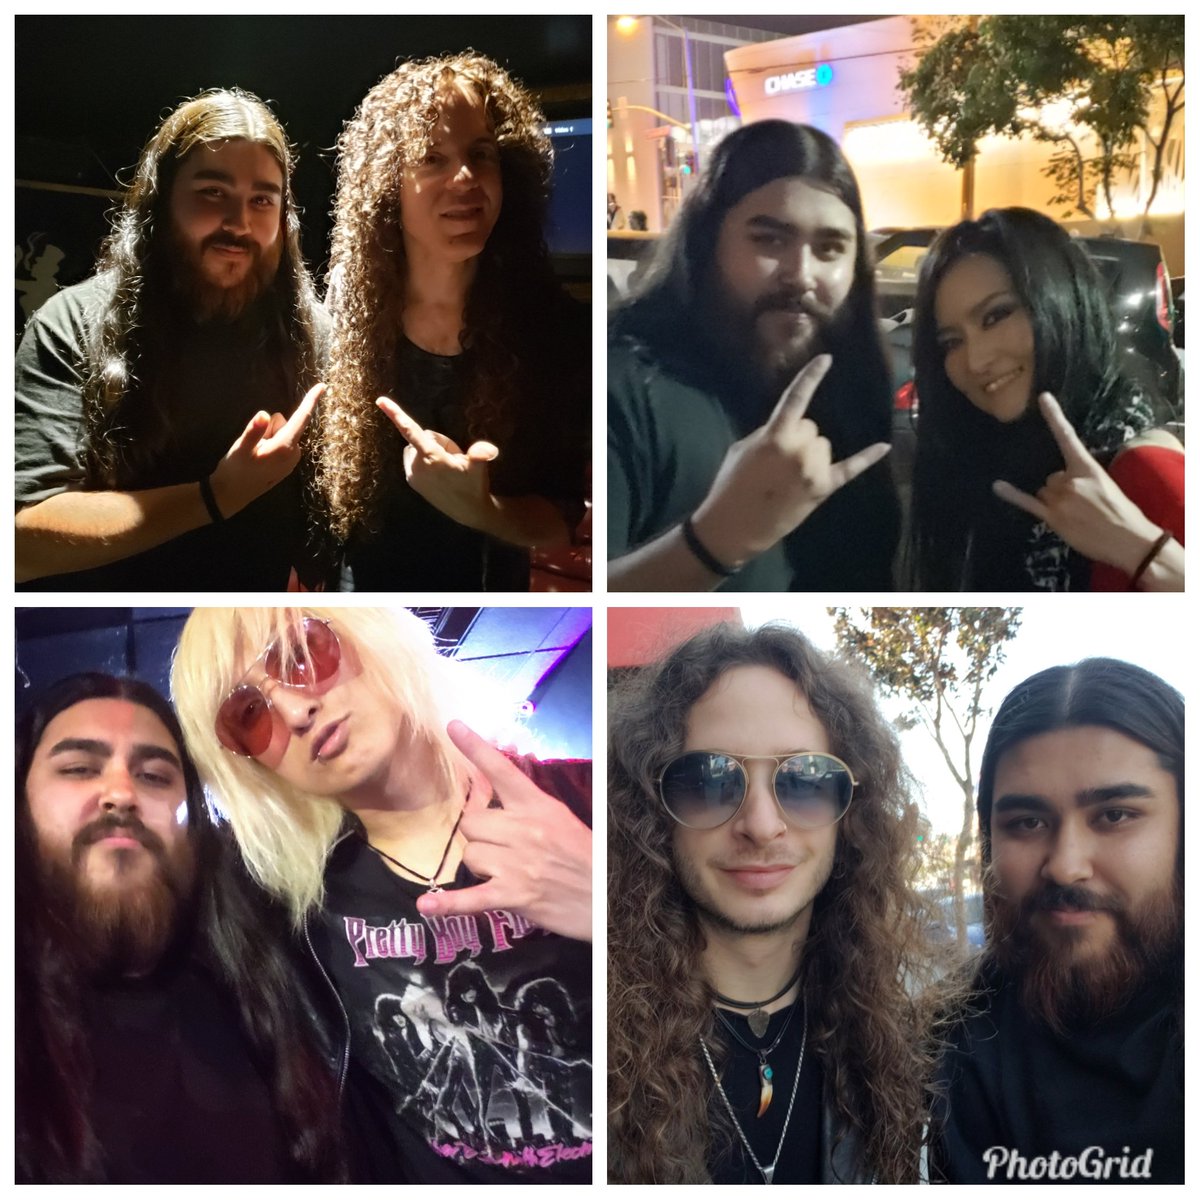 Sunday was amazing!! Got to meet @marty_friedman again! Also got to meet @CHARGEEEEEE @kiyoshi_1031 and #jordanziff a most excellent show! I'm so looking forward to seeing them again! Hands down, one of my best nights ever!